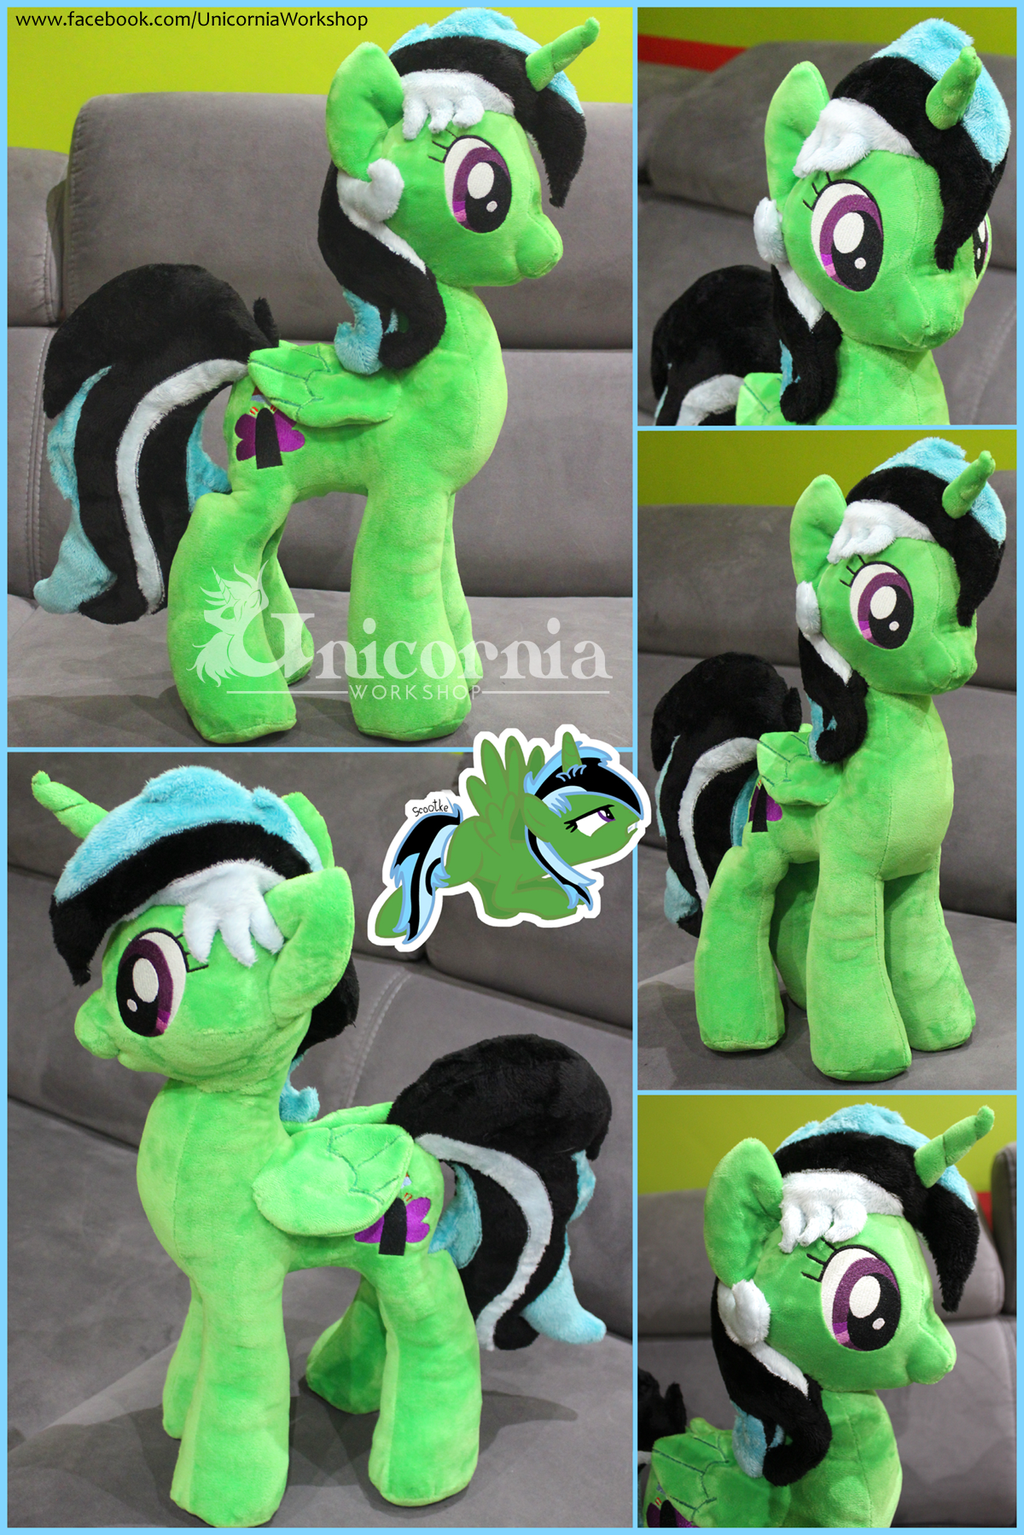 __oc_commission_plushie___by_kamisia-d8e